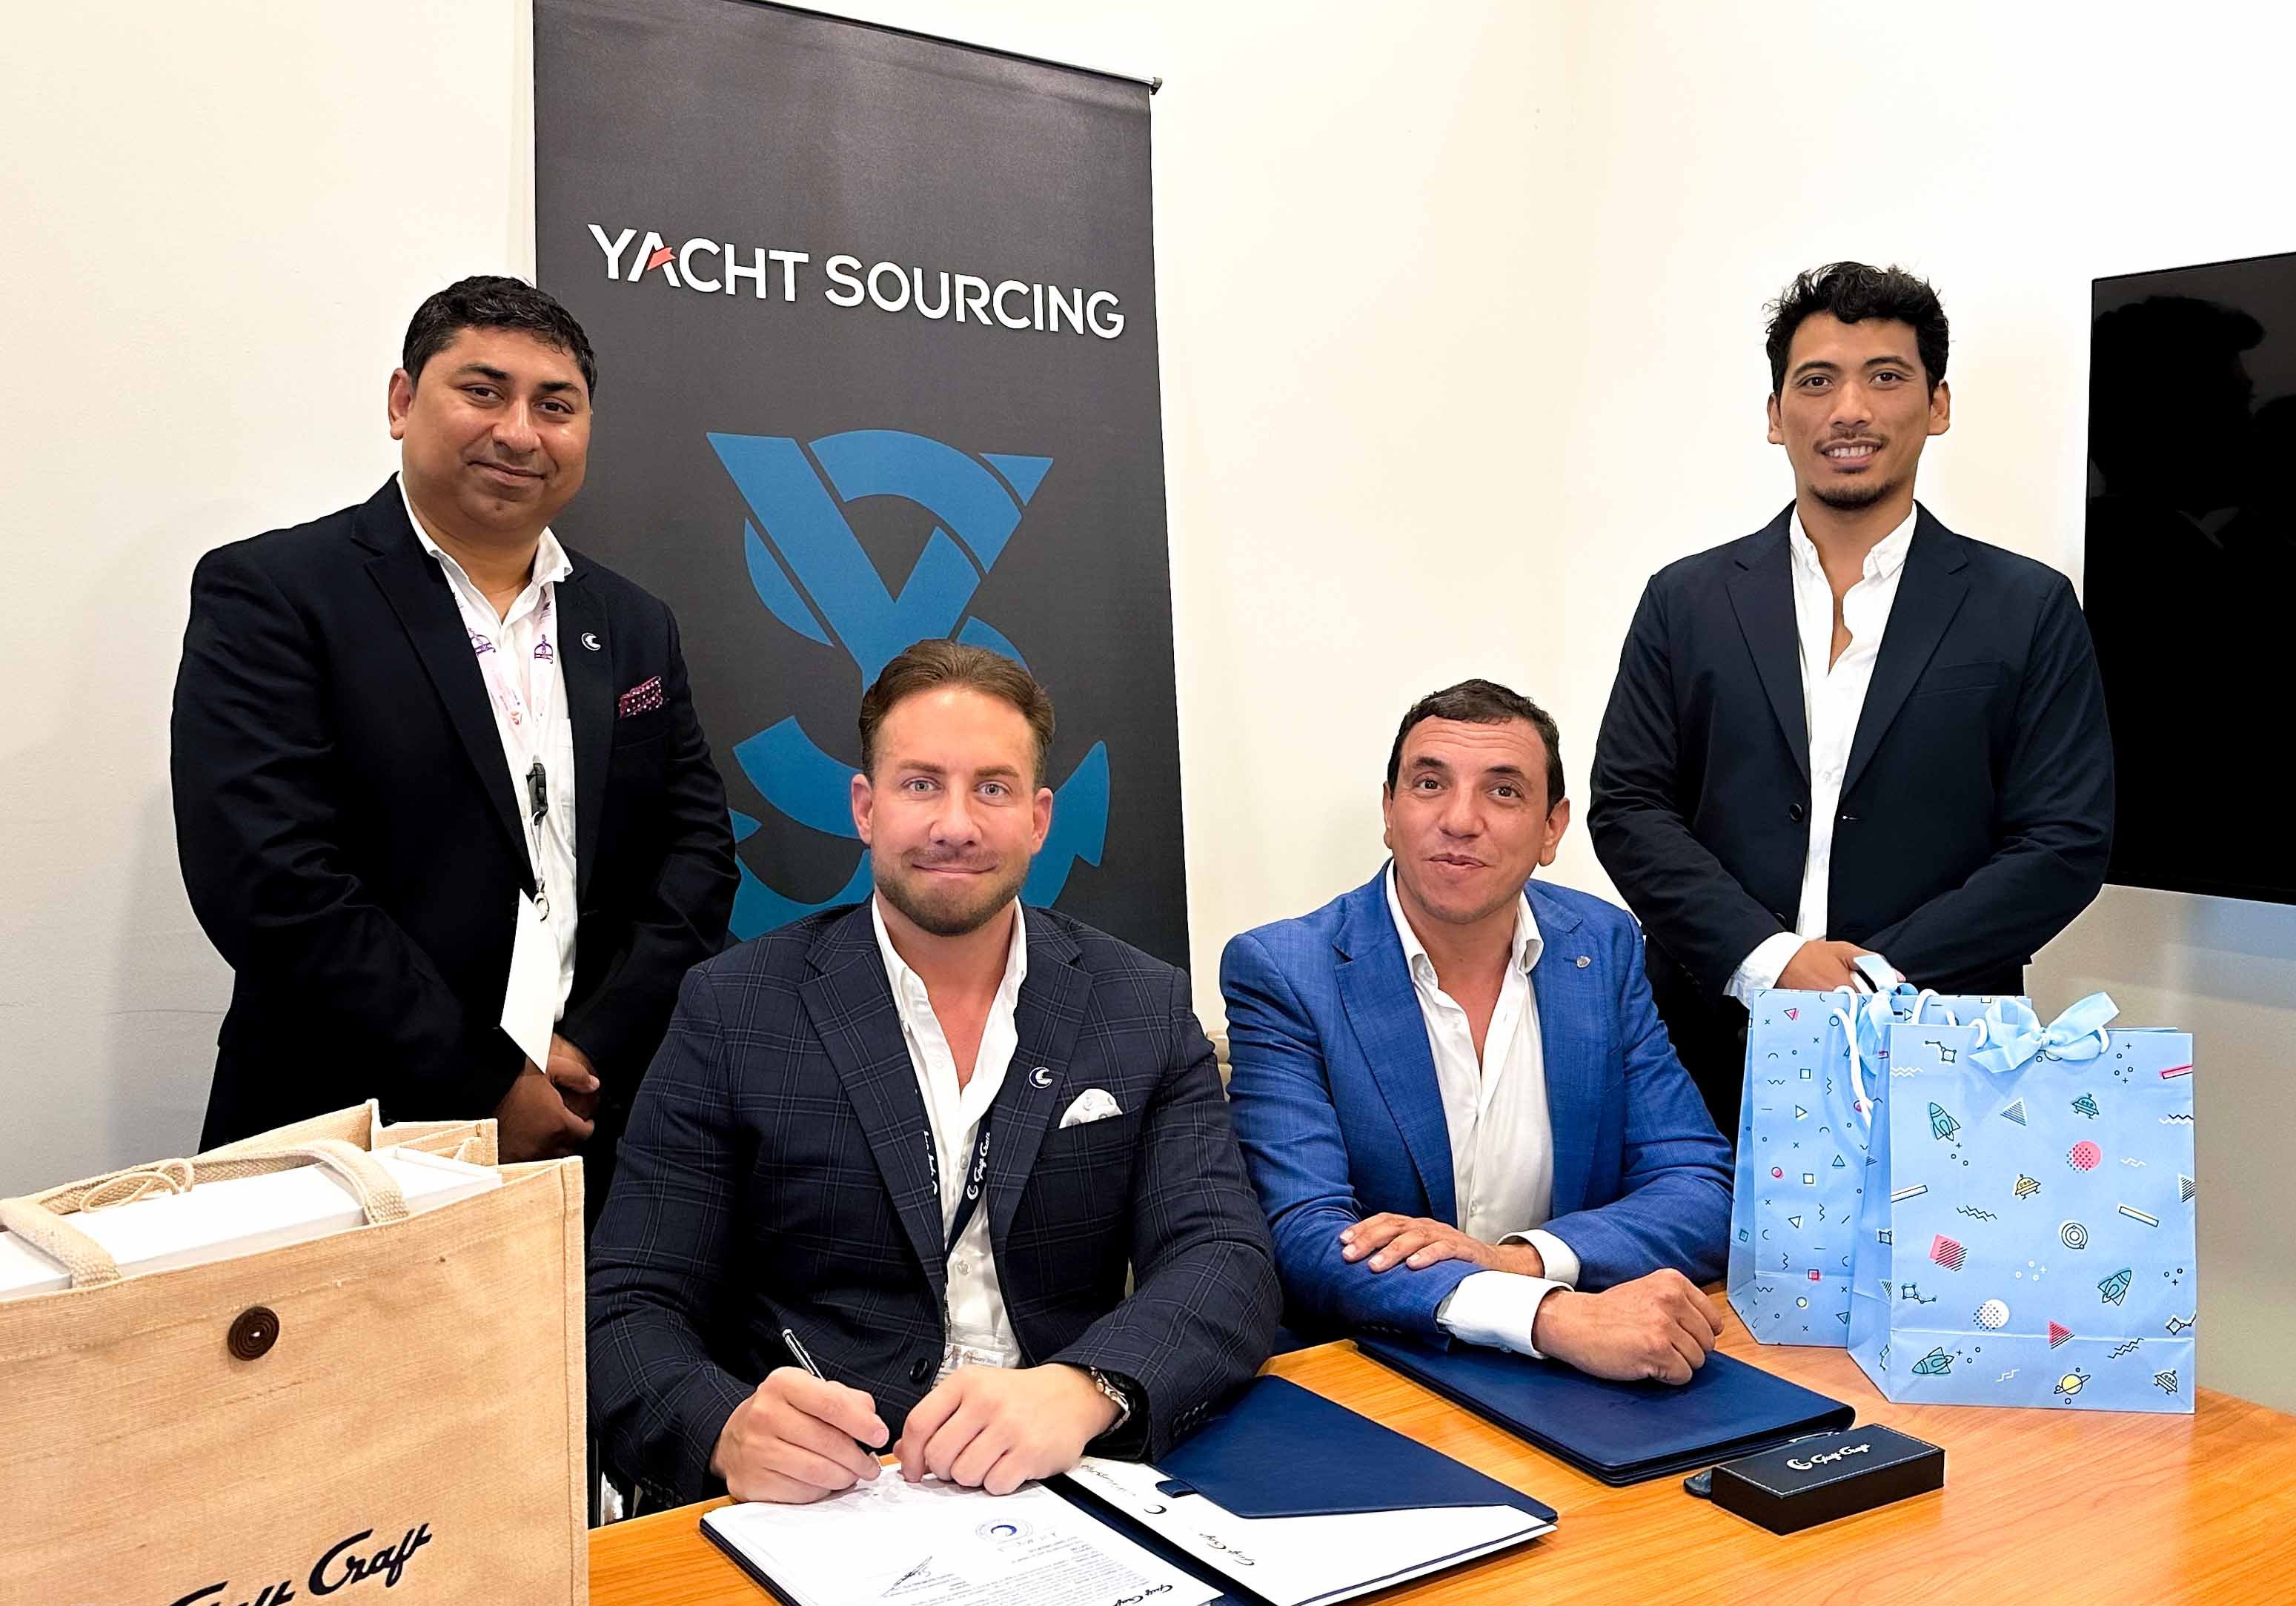 3. Signing New Dealer Yacht Sourcing